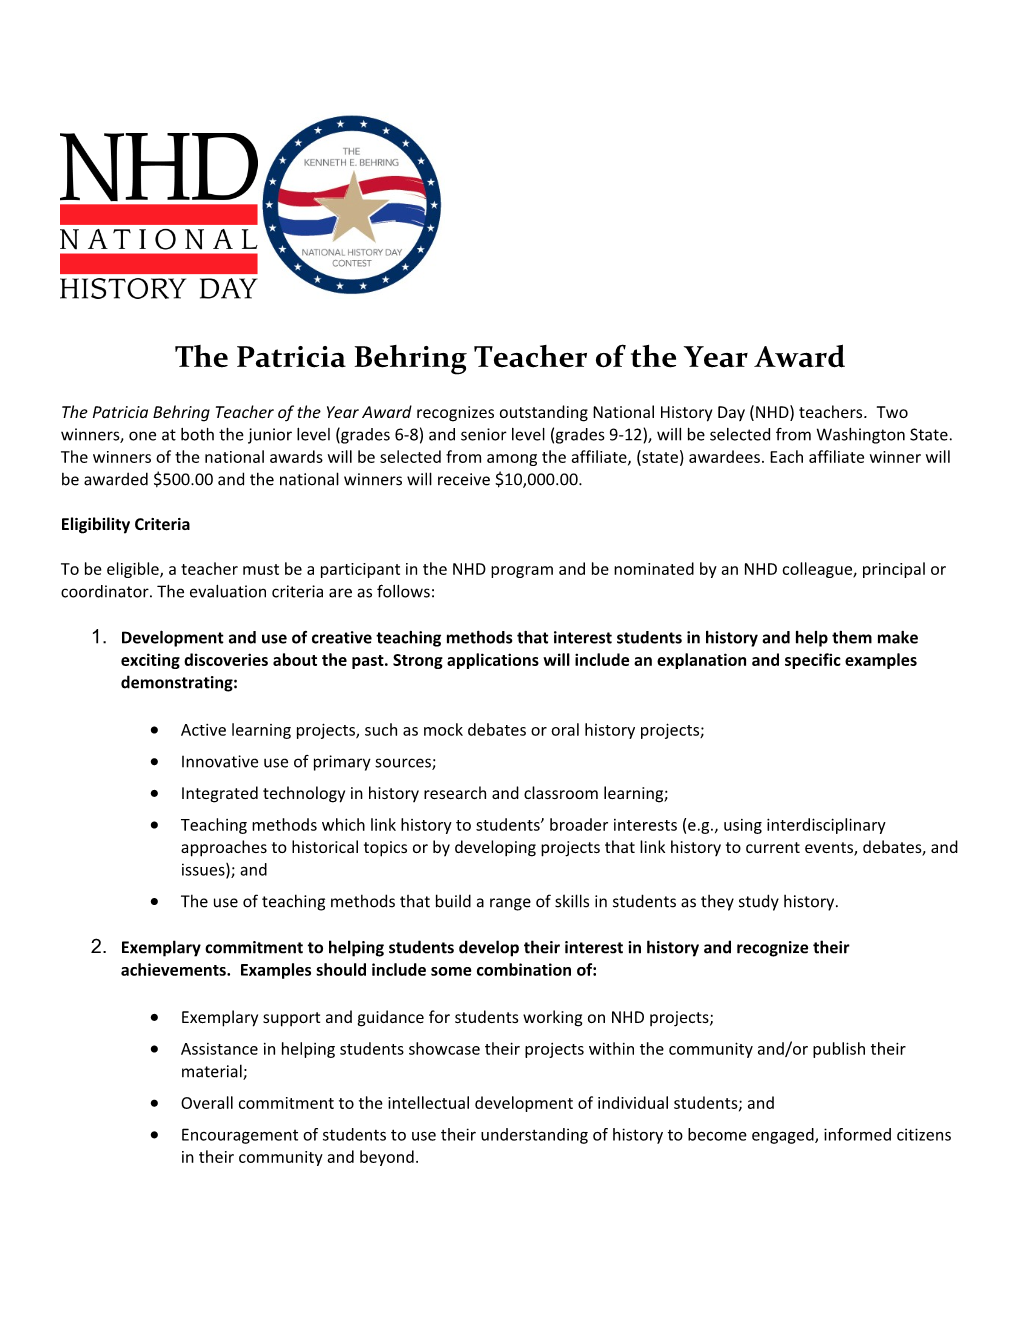 The Patricia Behring Teacher of the Year Award